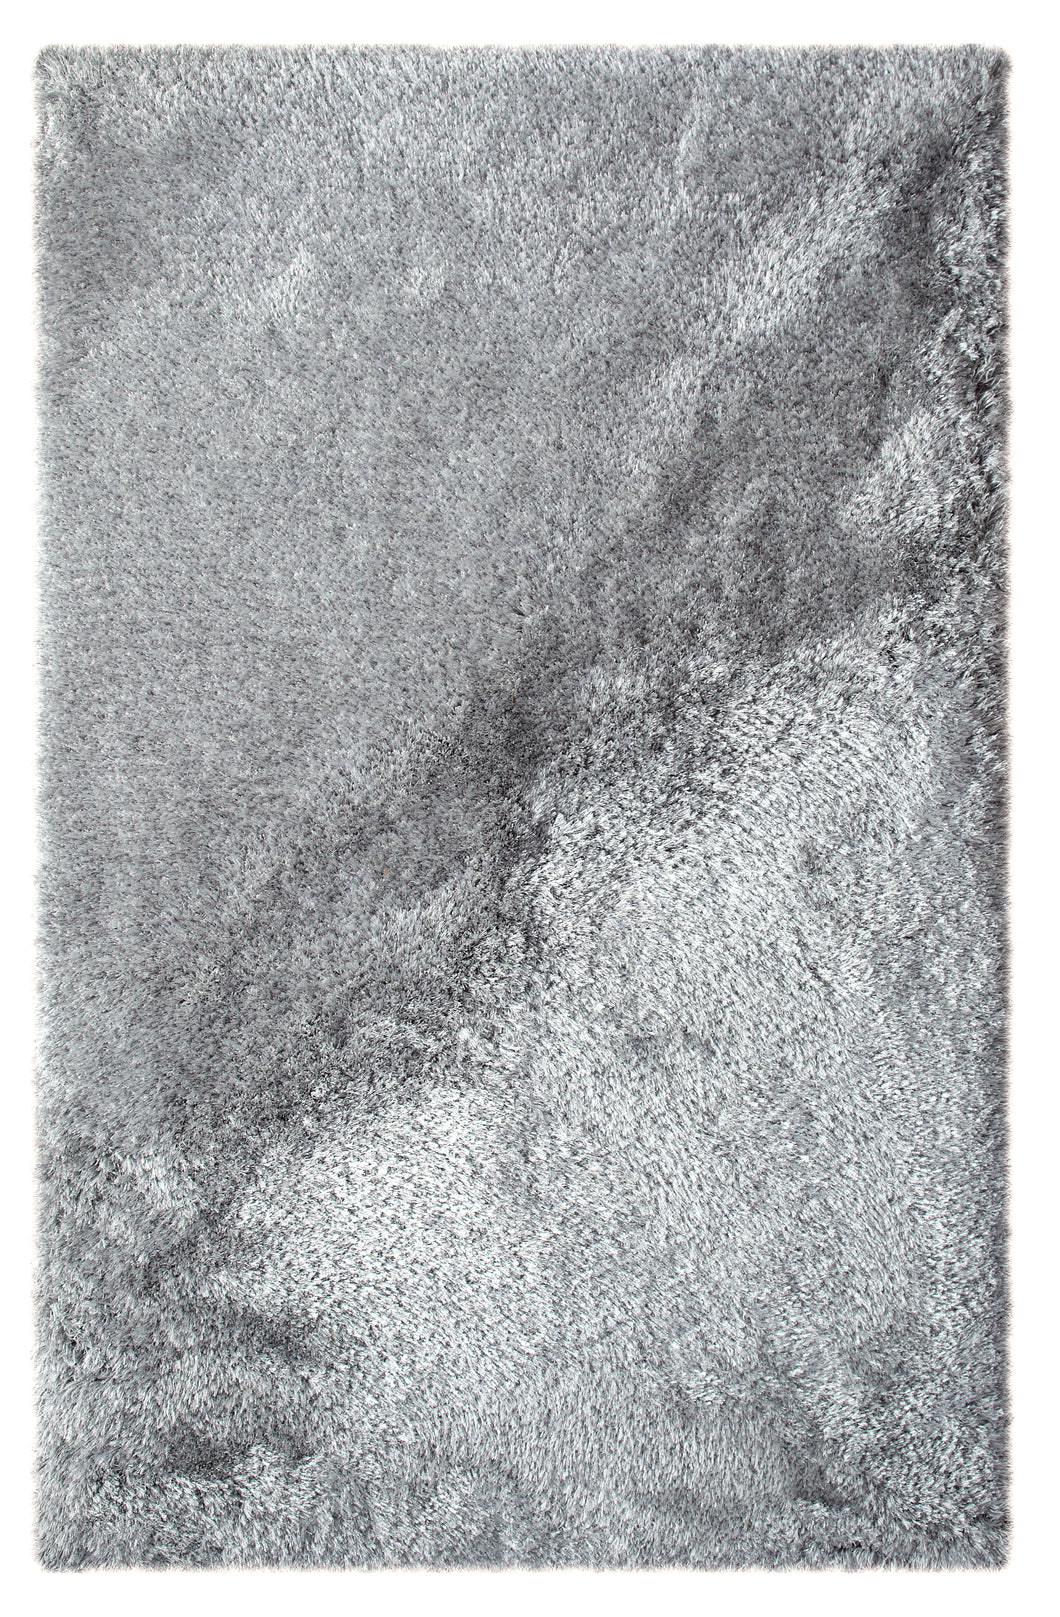 Dynamic Rugs Luxe 4201-900 Ice Area Rug